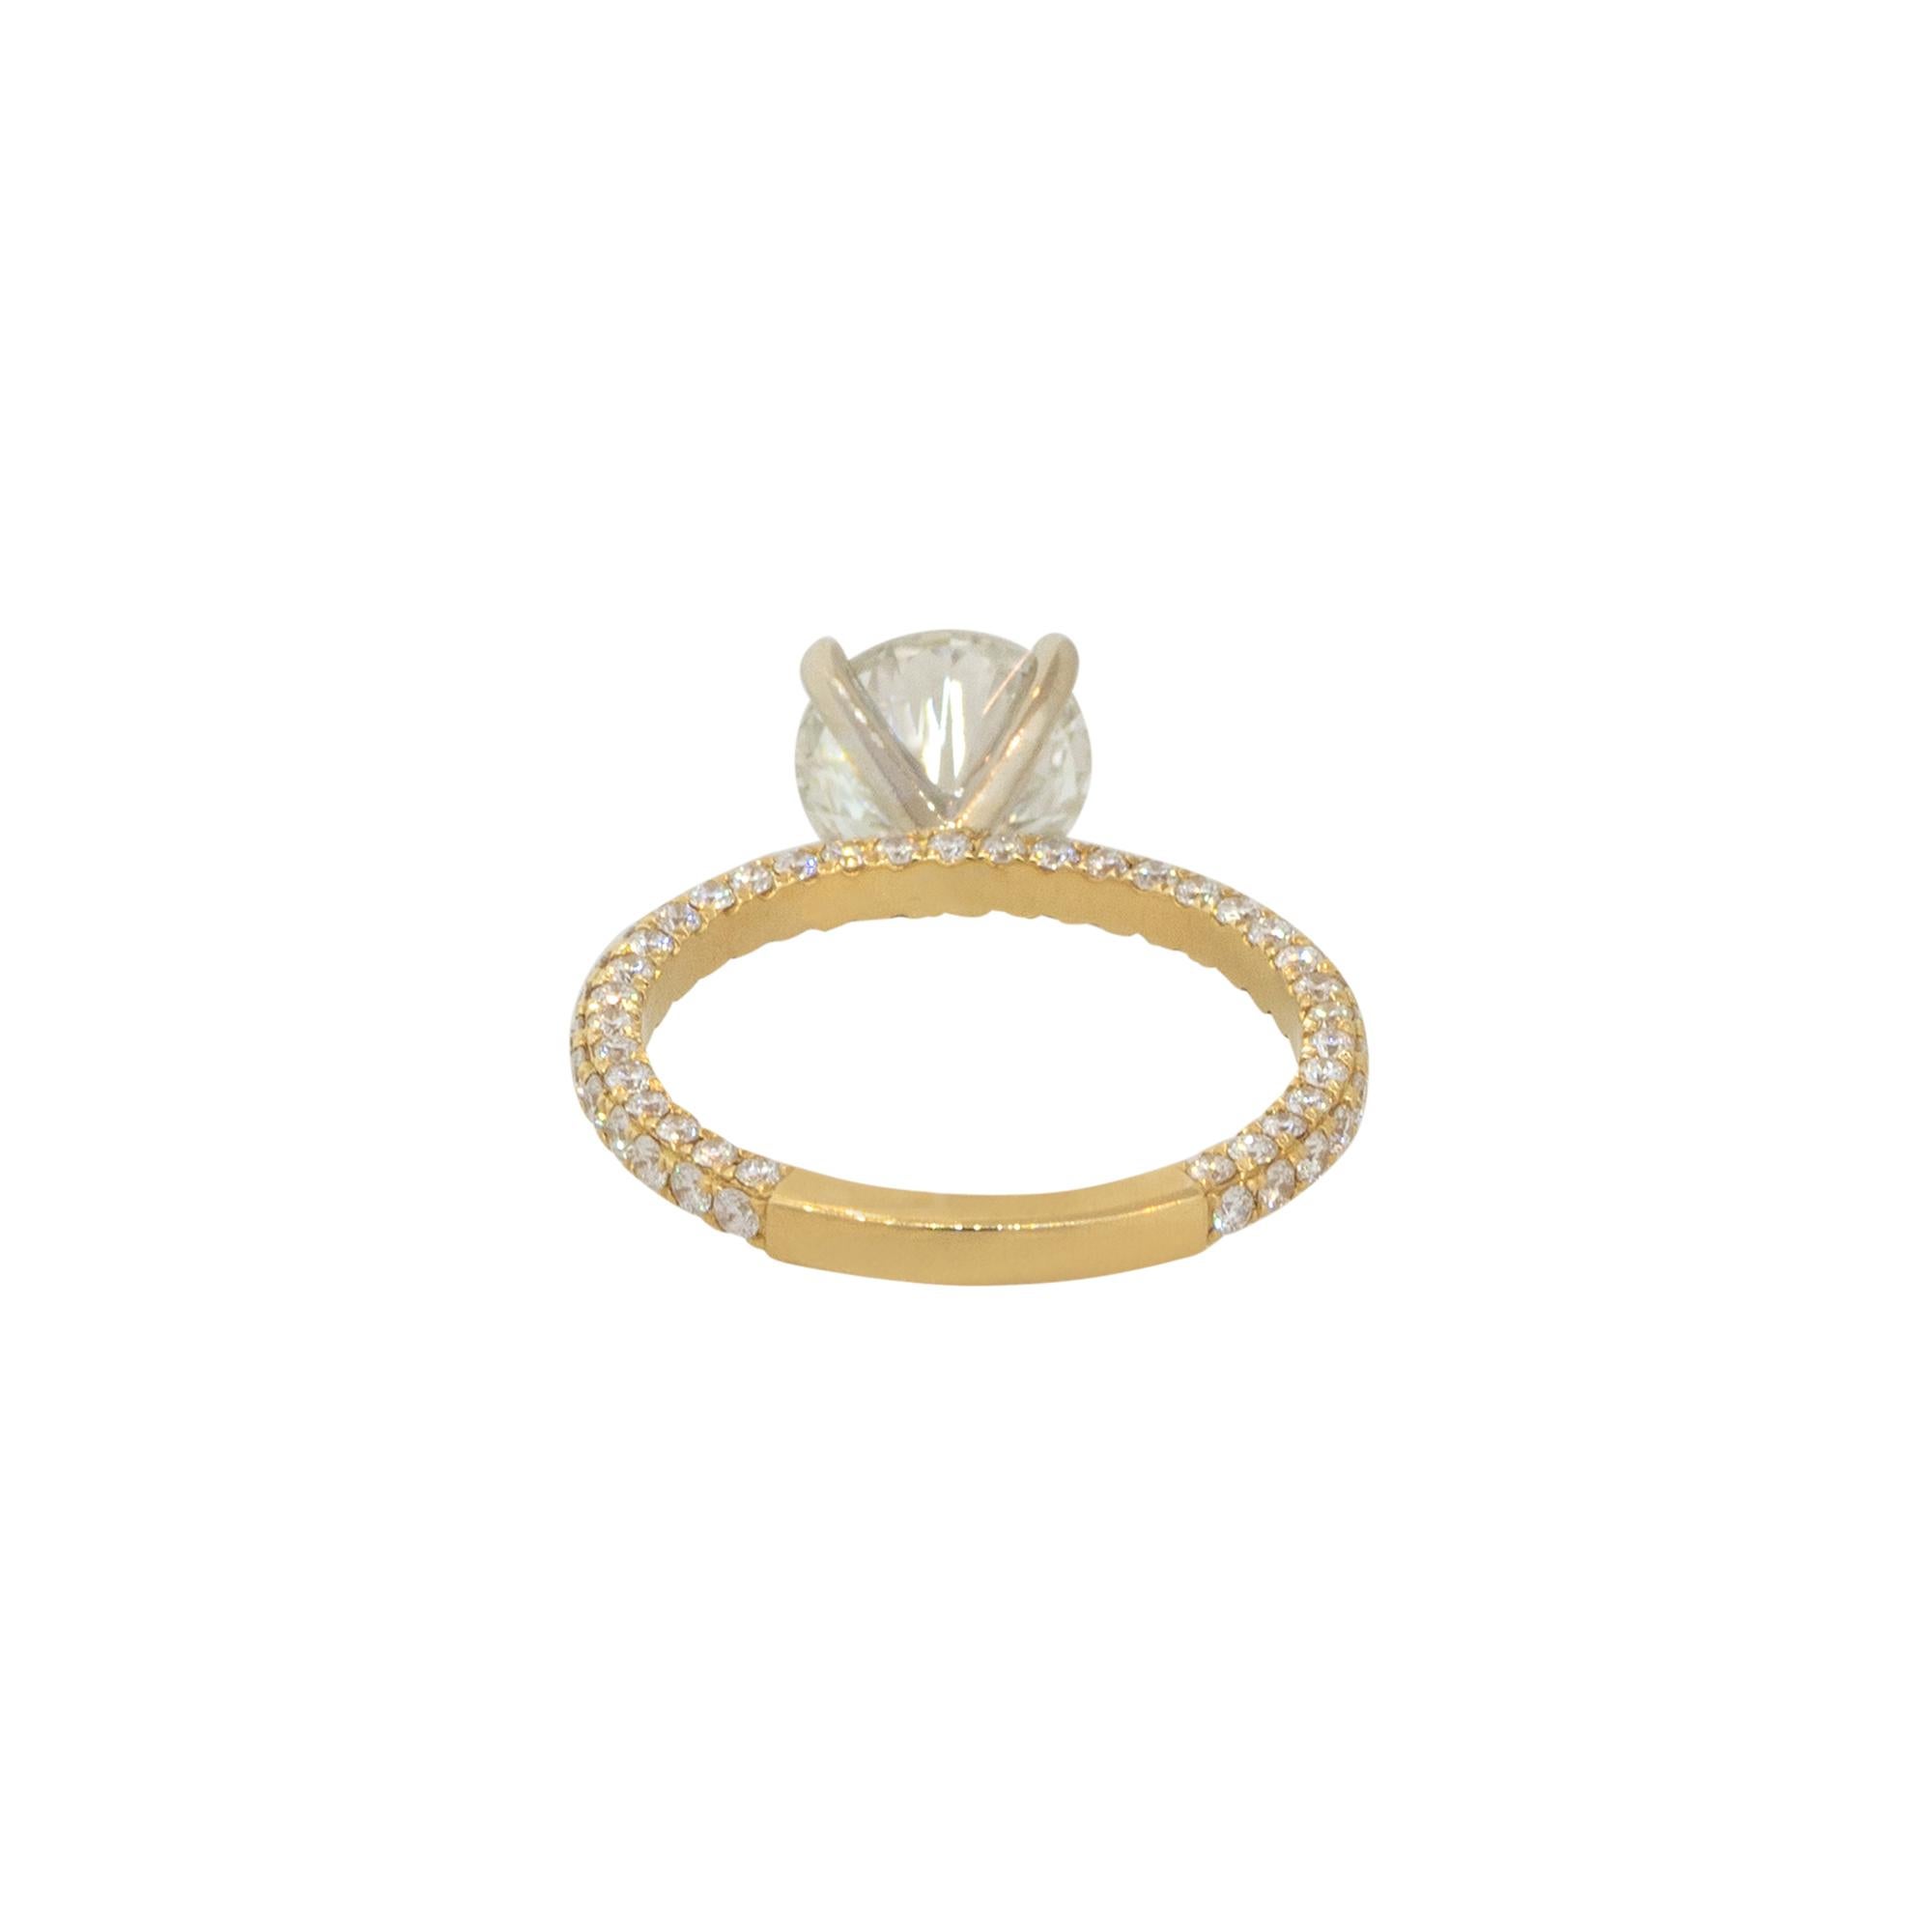 3.19 Carat Diamond Solitaire Engagement Ring 18 Karat in Stock In Excellent Condition For Sale In Boca Raton, FL